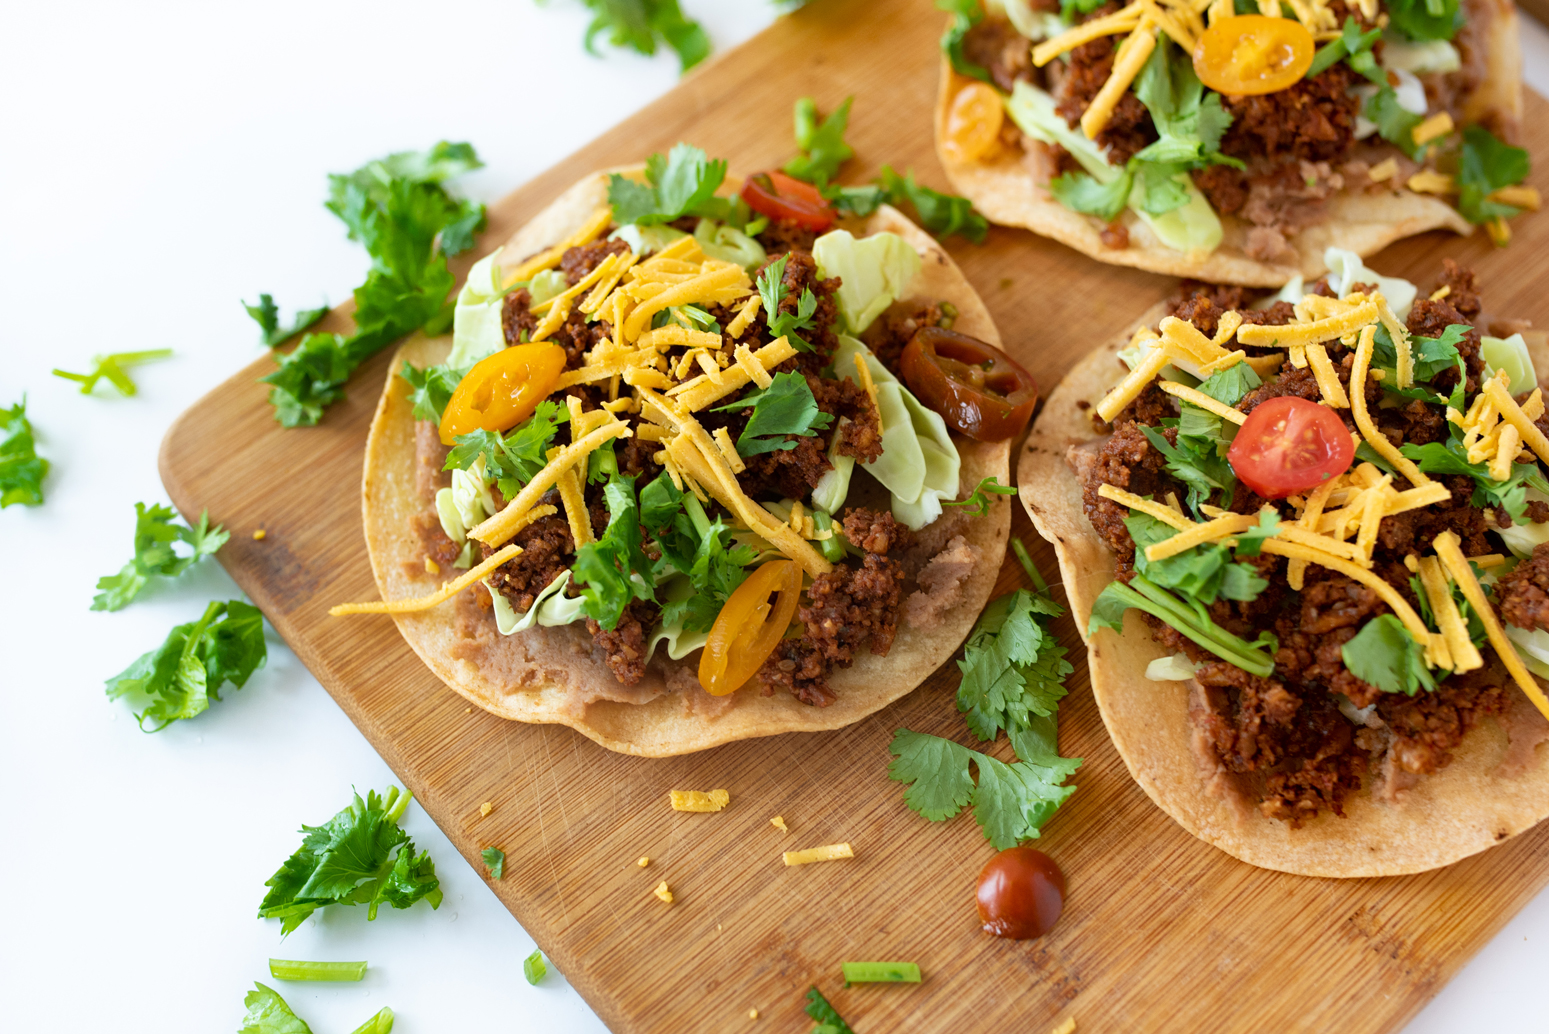 This 5 minute Plant-Based Taco "Meat" recipe is quick, easy, can be eaten cold or warm AND is freezer friendly. How can you go wrong?! #TacoTuesday here we come!